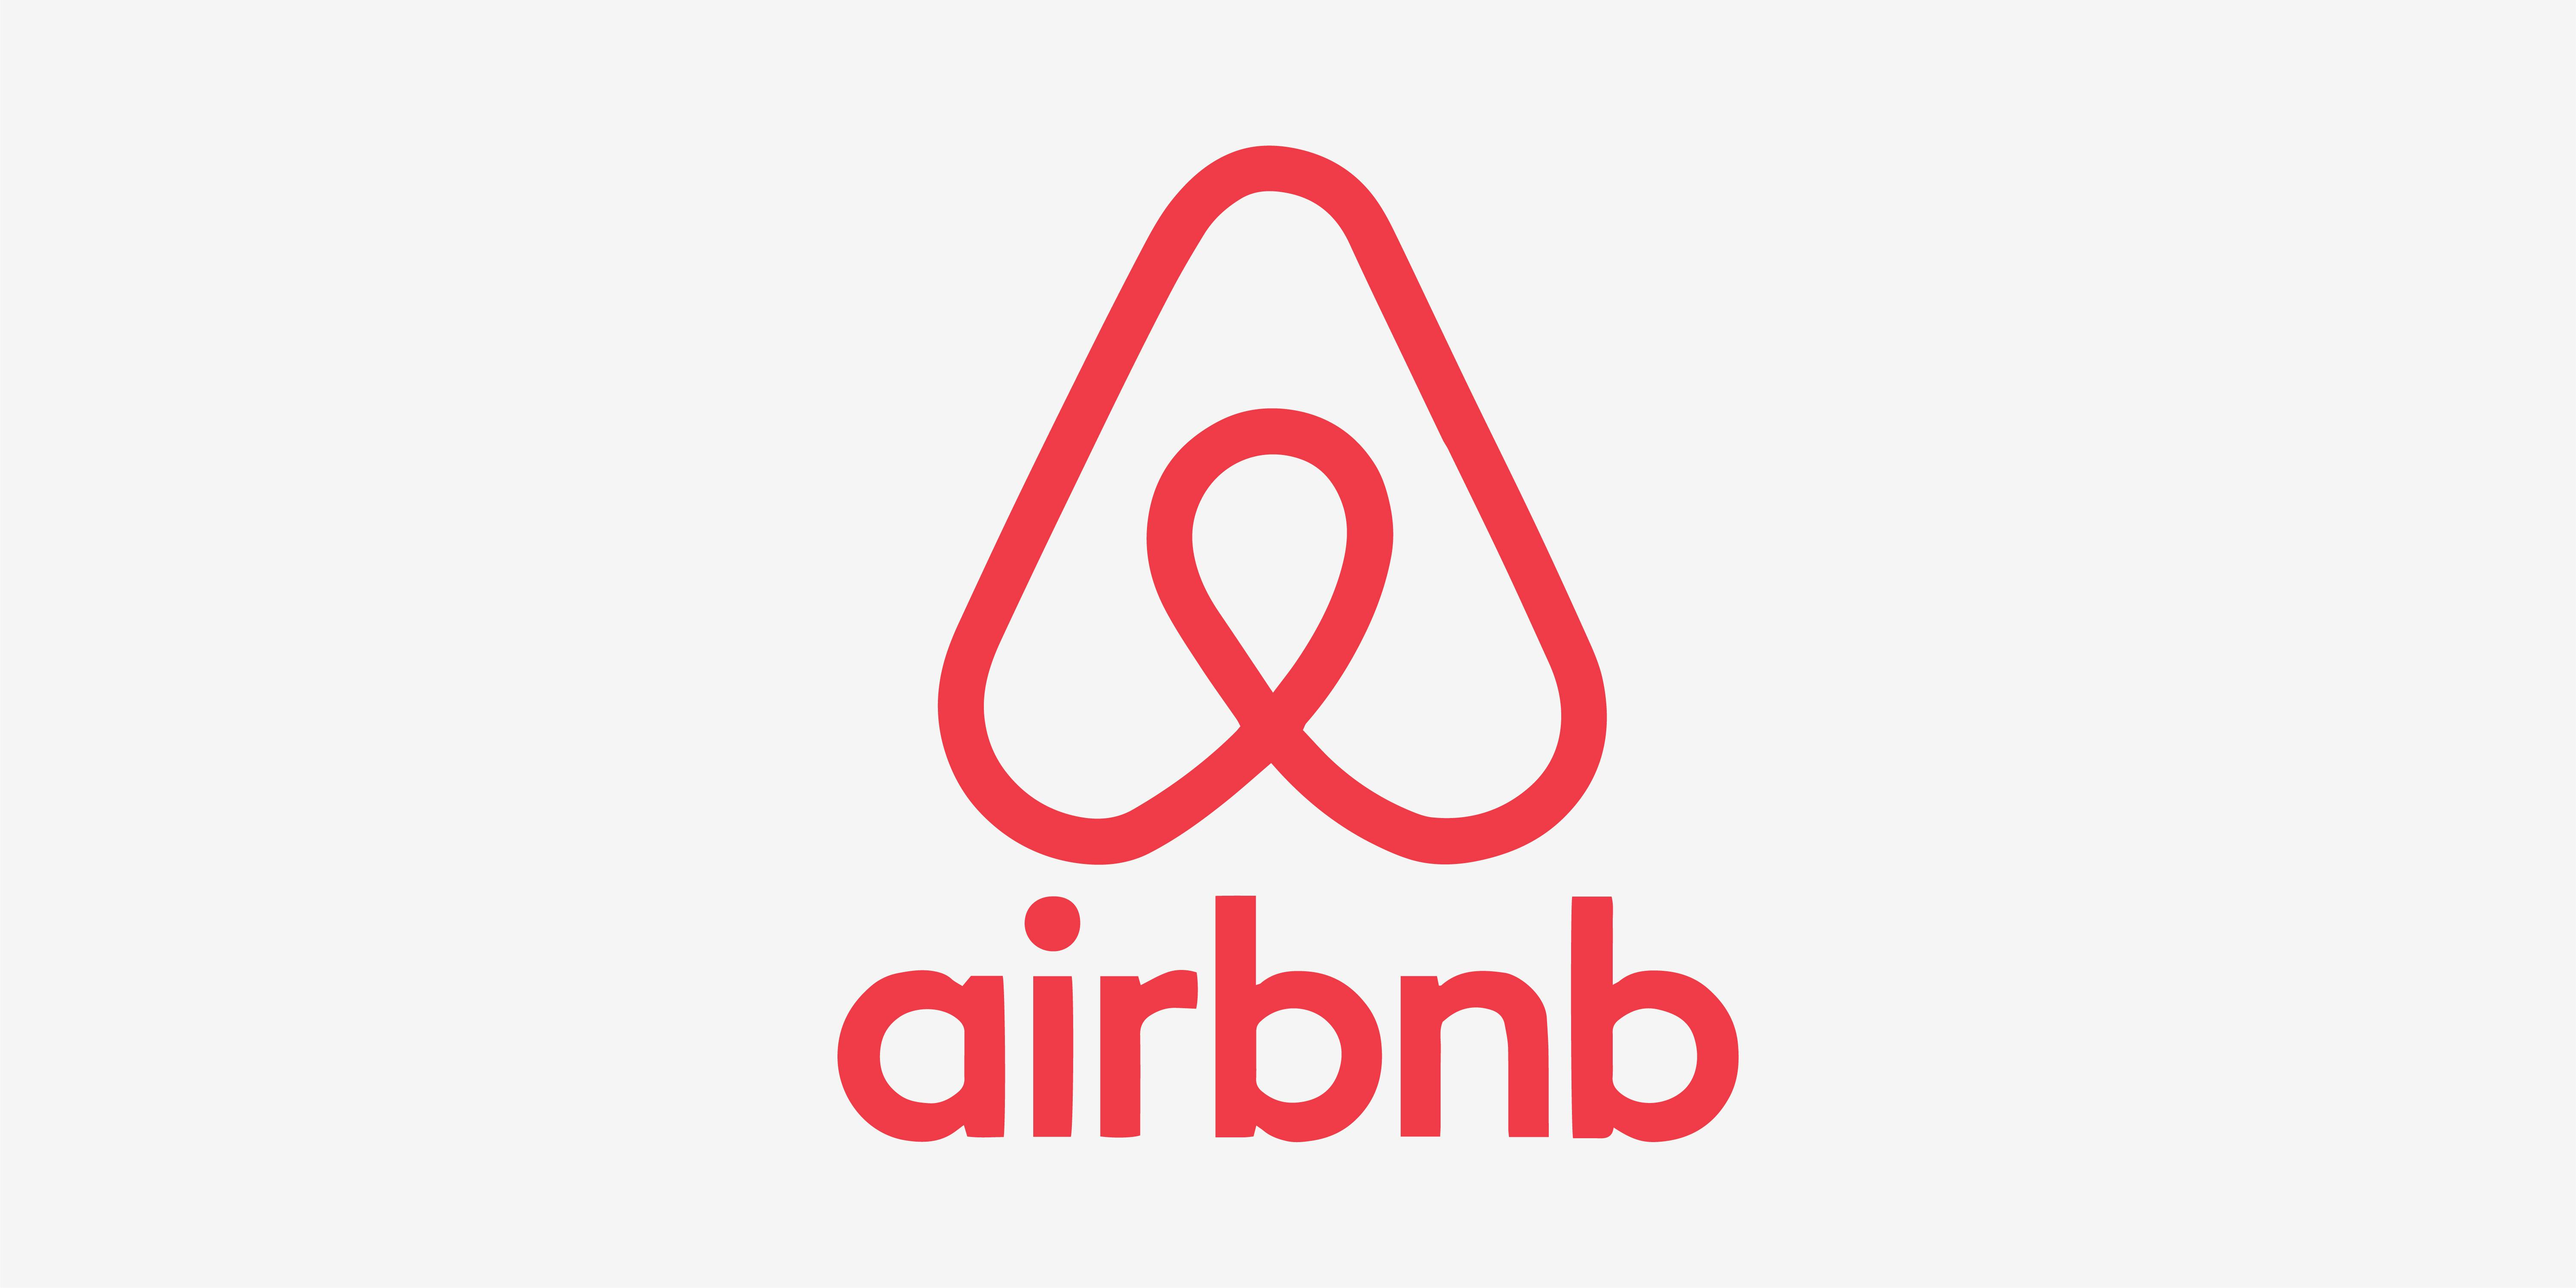 other apps like airbnb